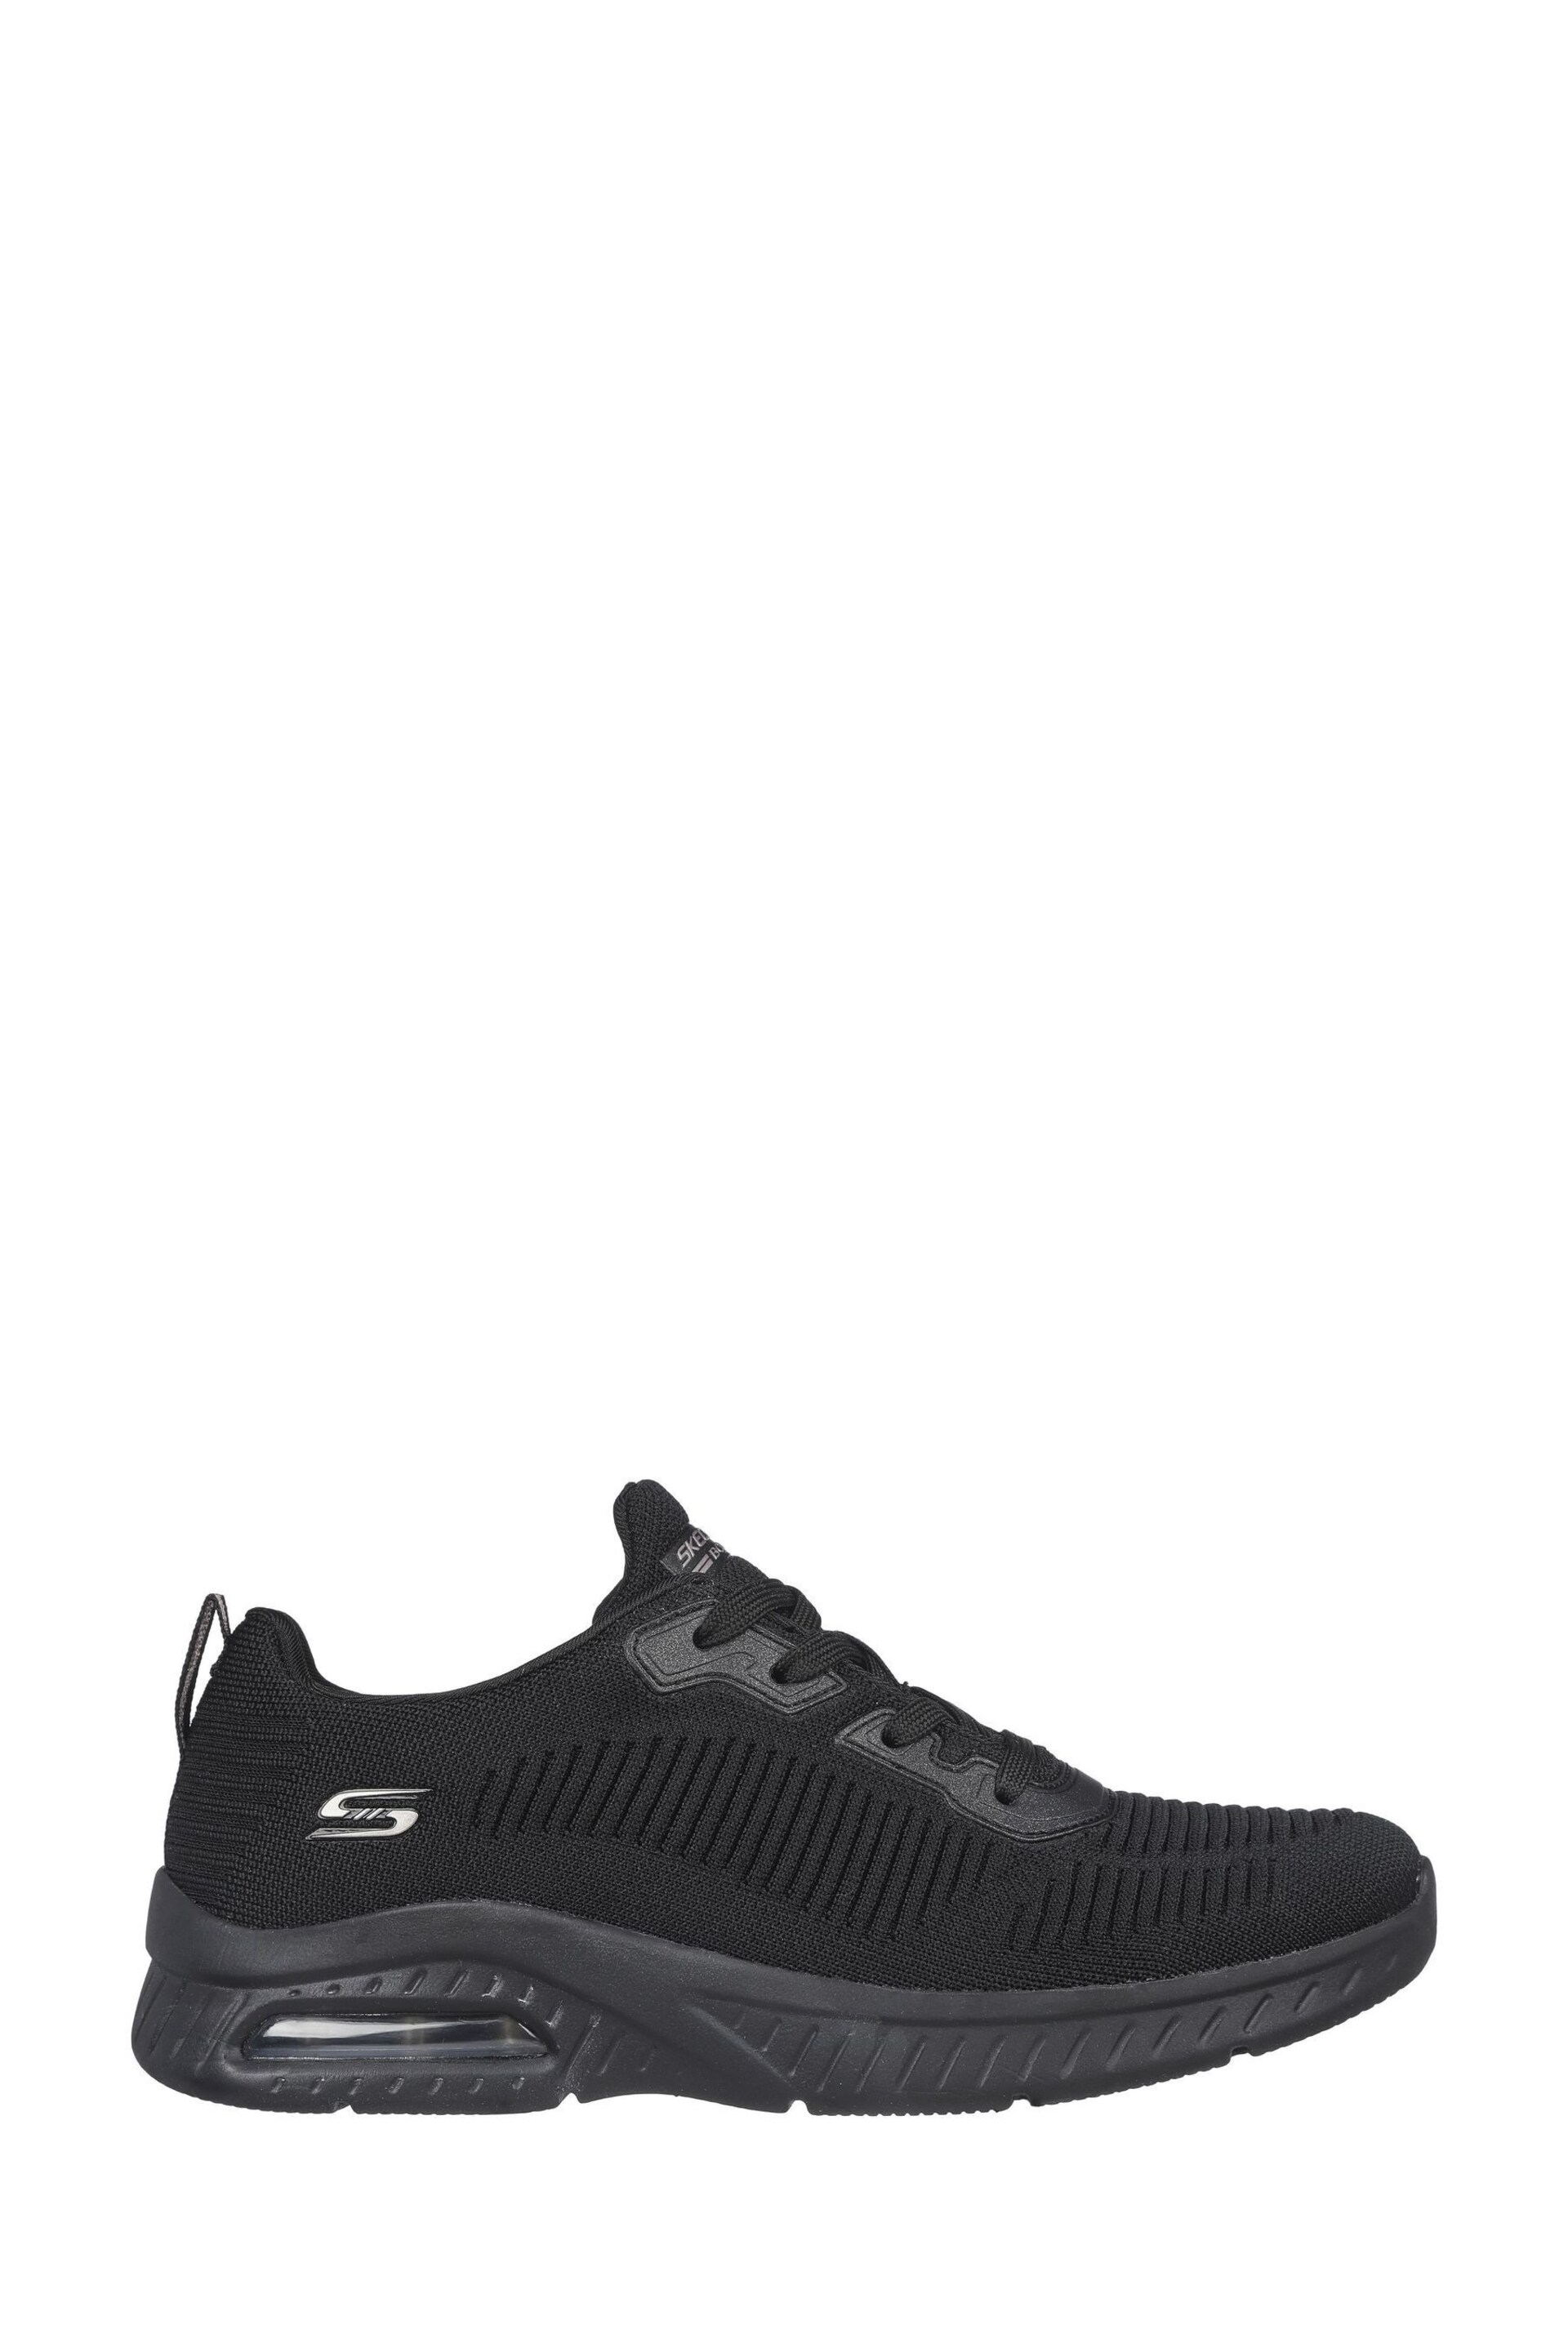 Skechers Black Squad Air Womens Trainers - Image 1 of 5